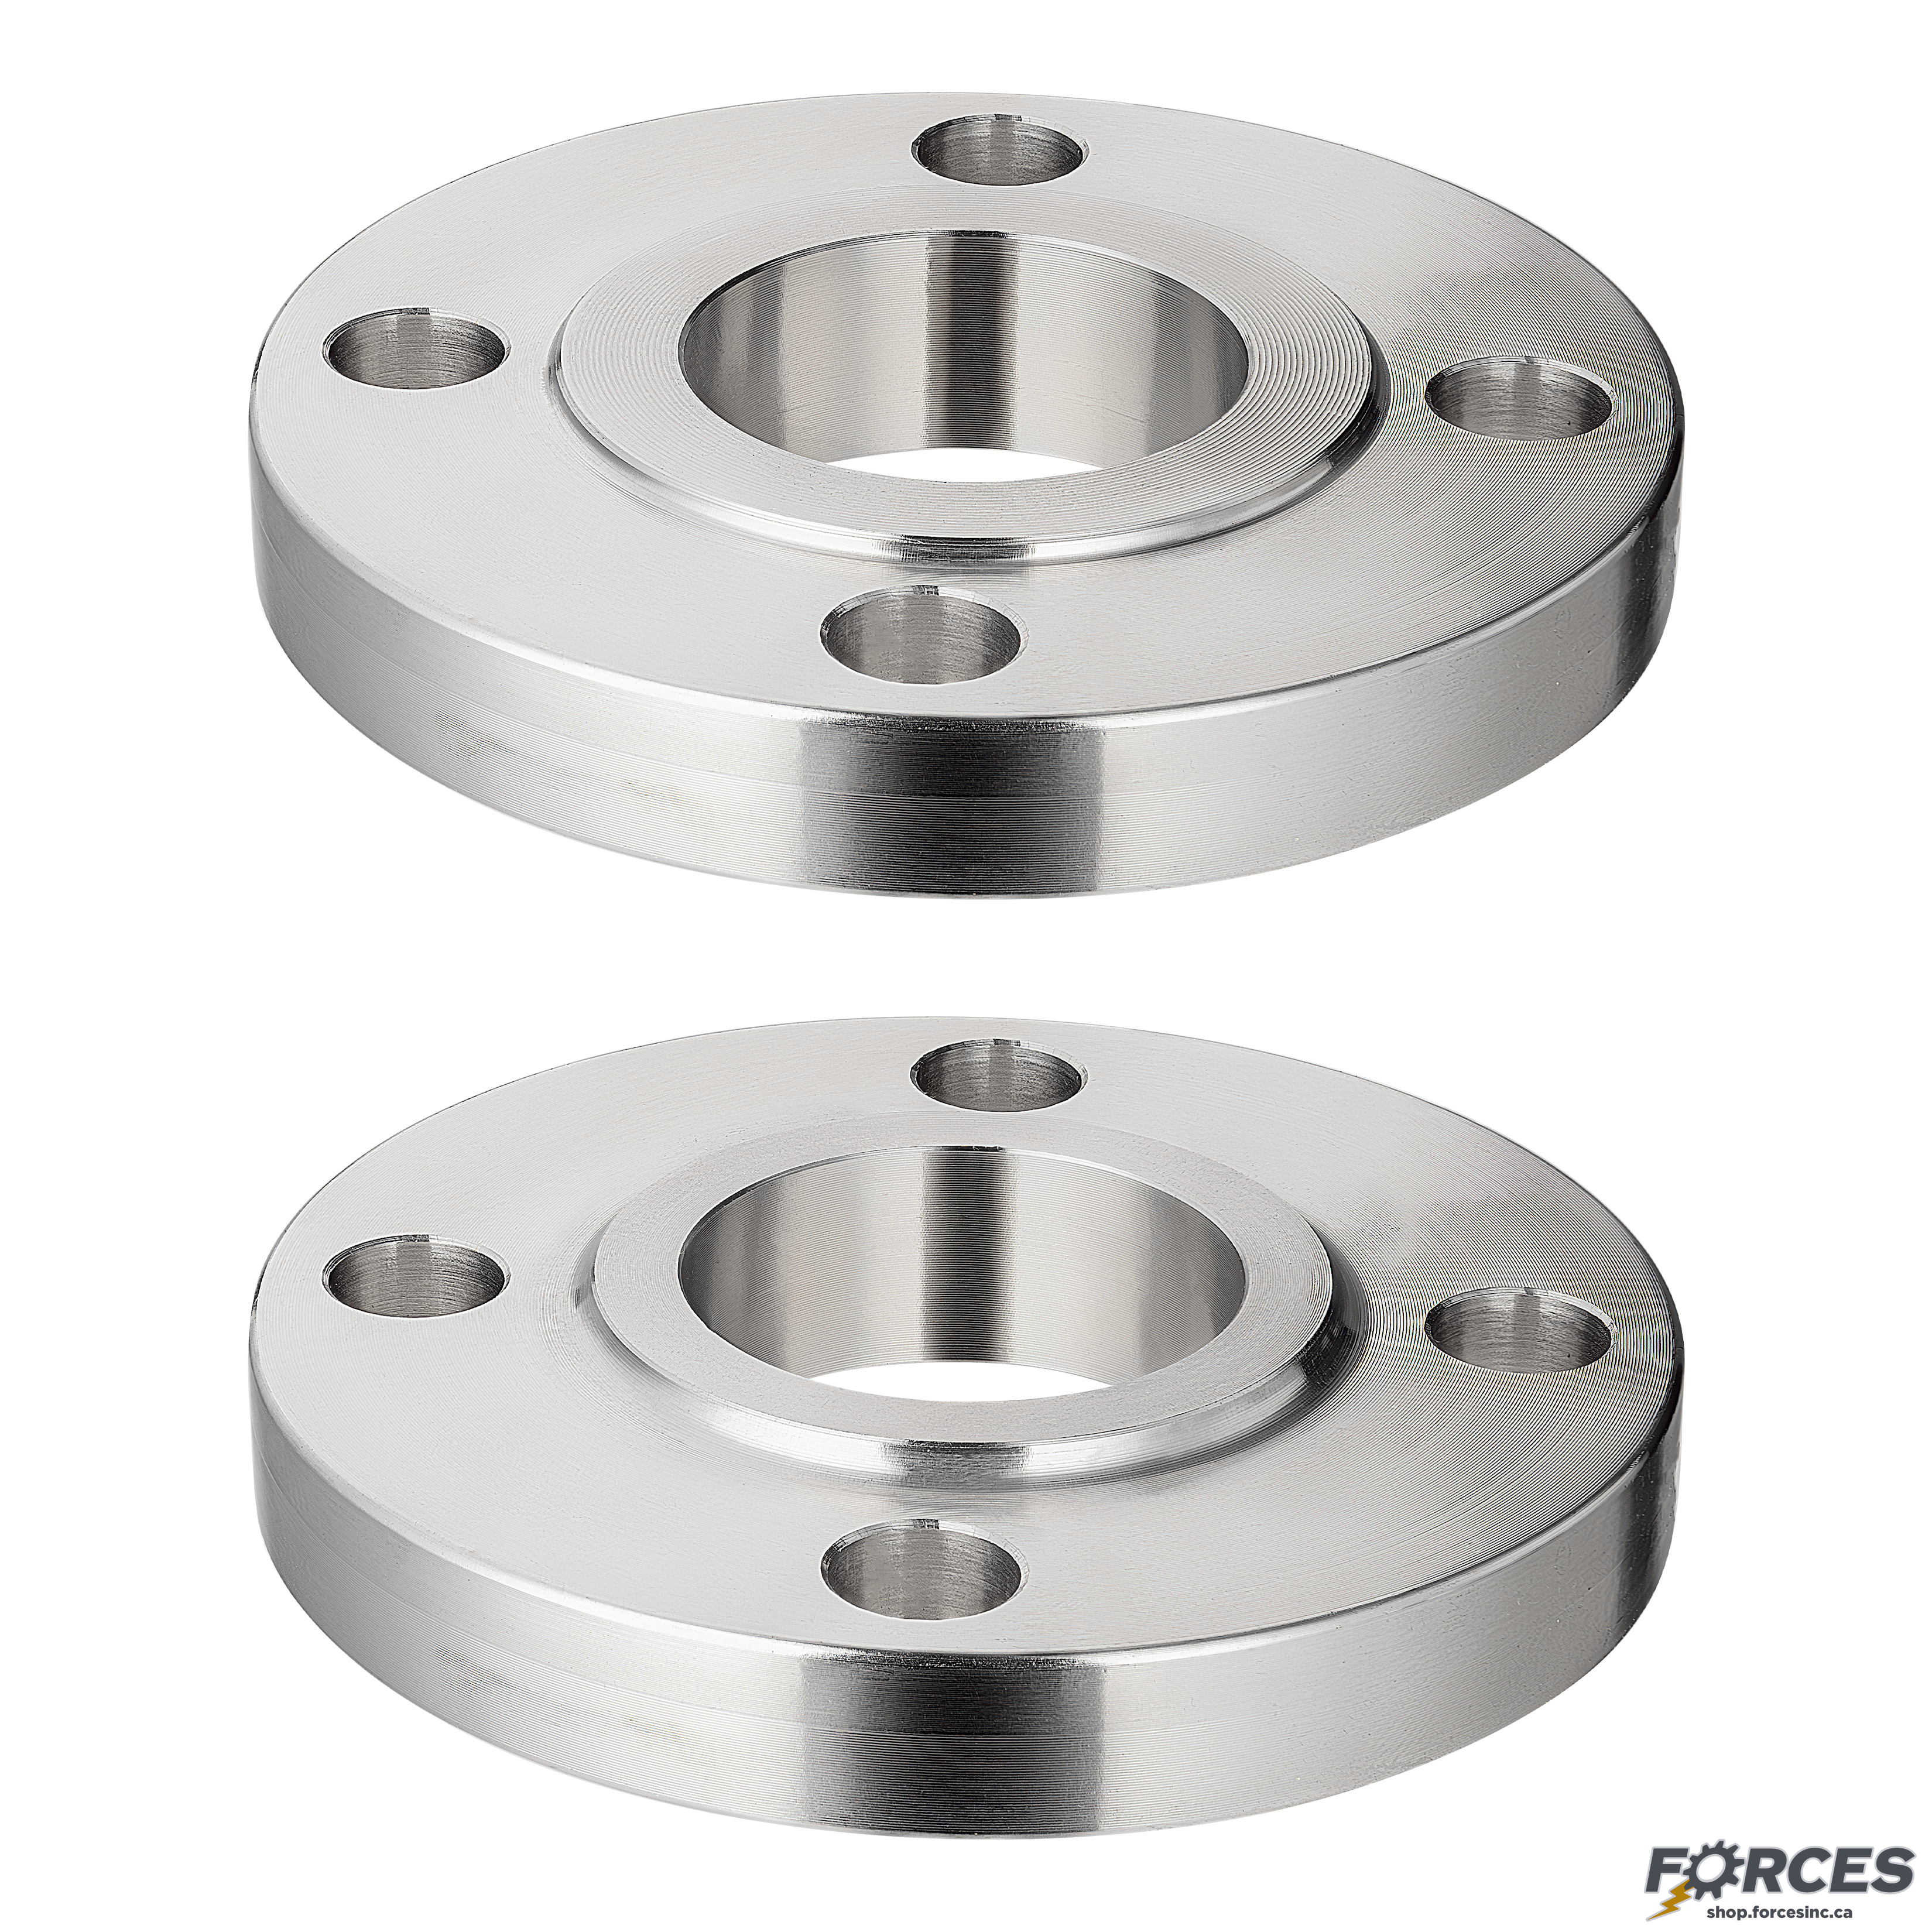 3/4" Slip-On Flange Class #150 - Stainless Steel 316 - Forces Inc